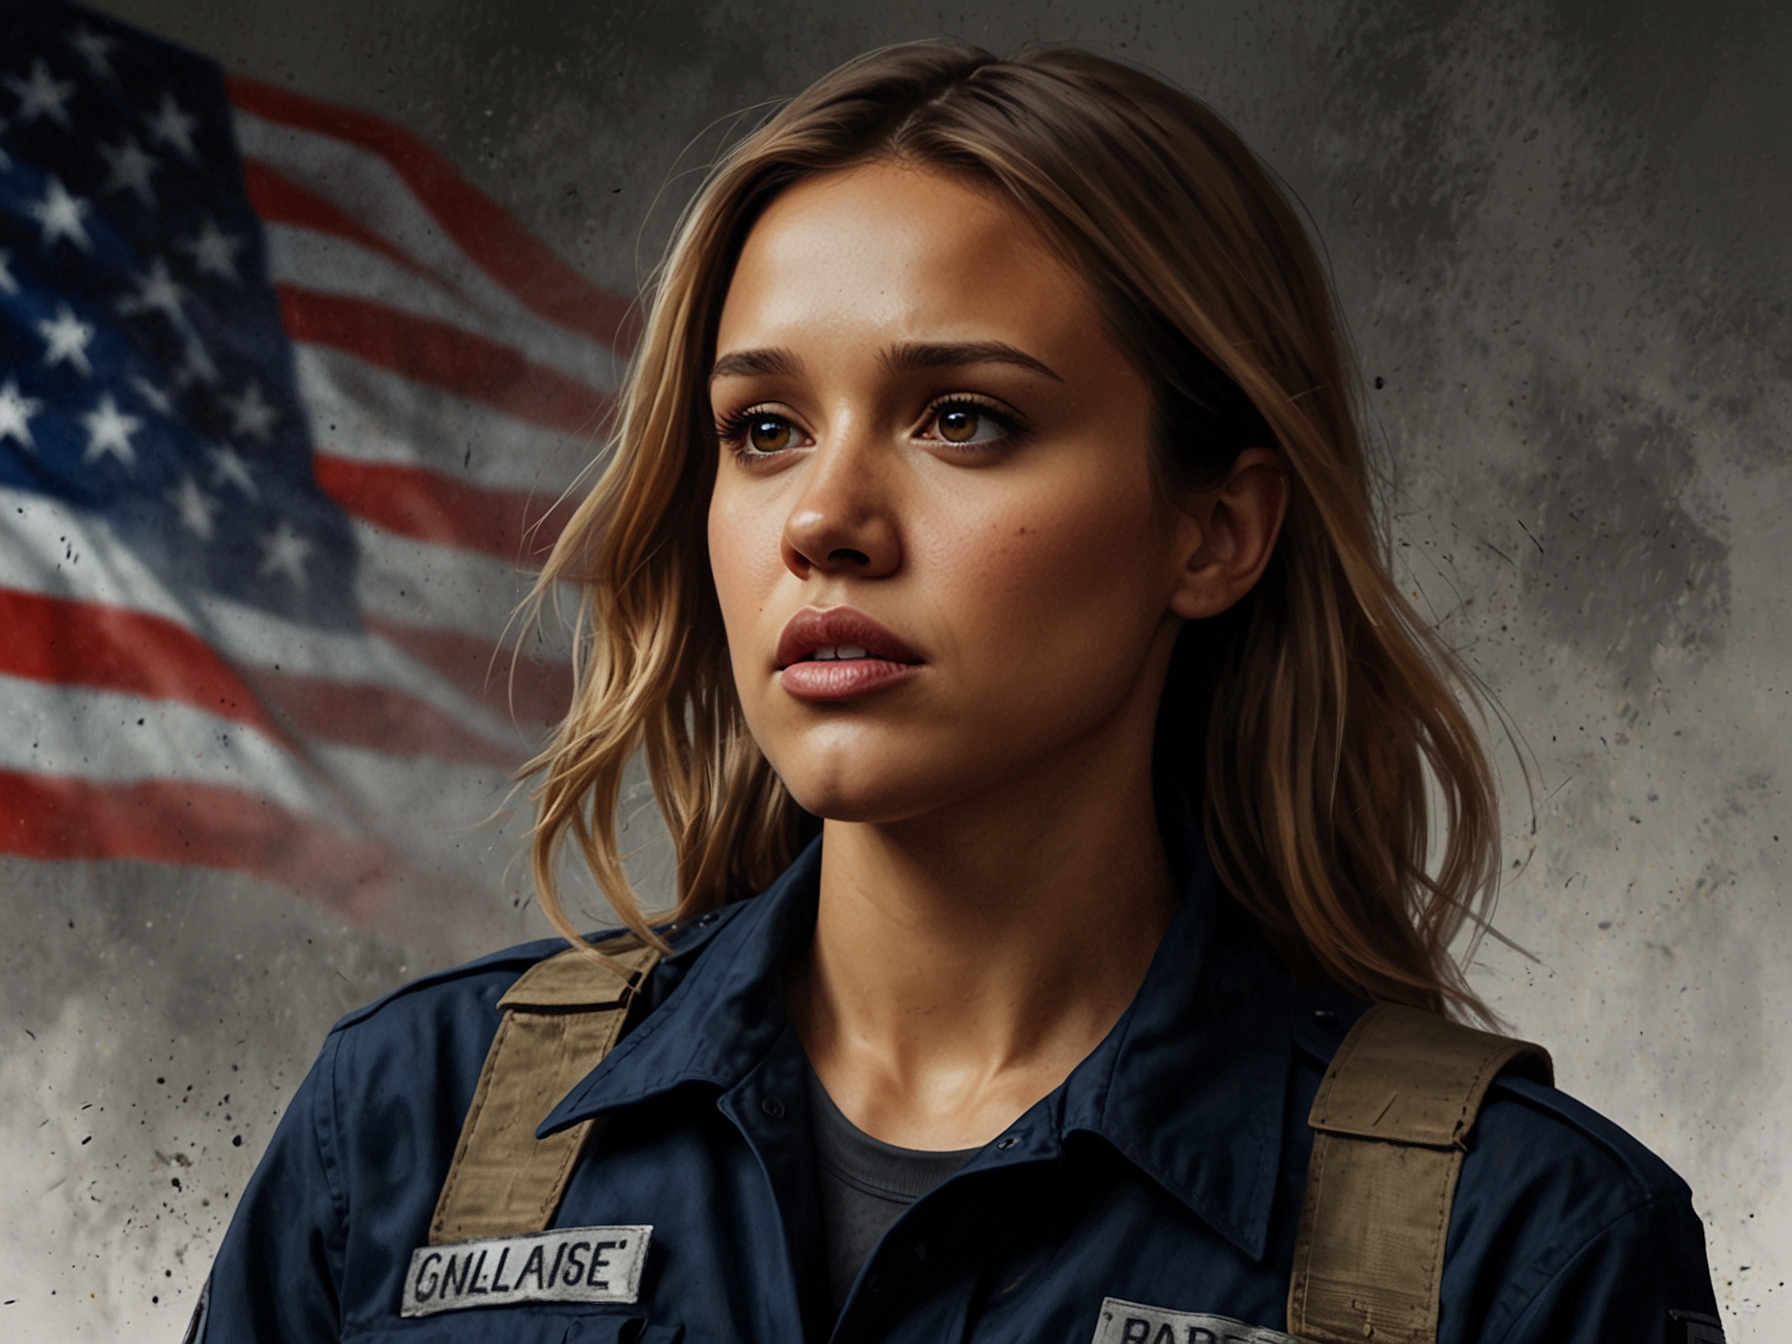 A suspenseful moment featuring Jessica Alba as a determined veteran in 'Trigger Warning,' highlighting the intensity and emotional depth of her quest for justice.